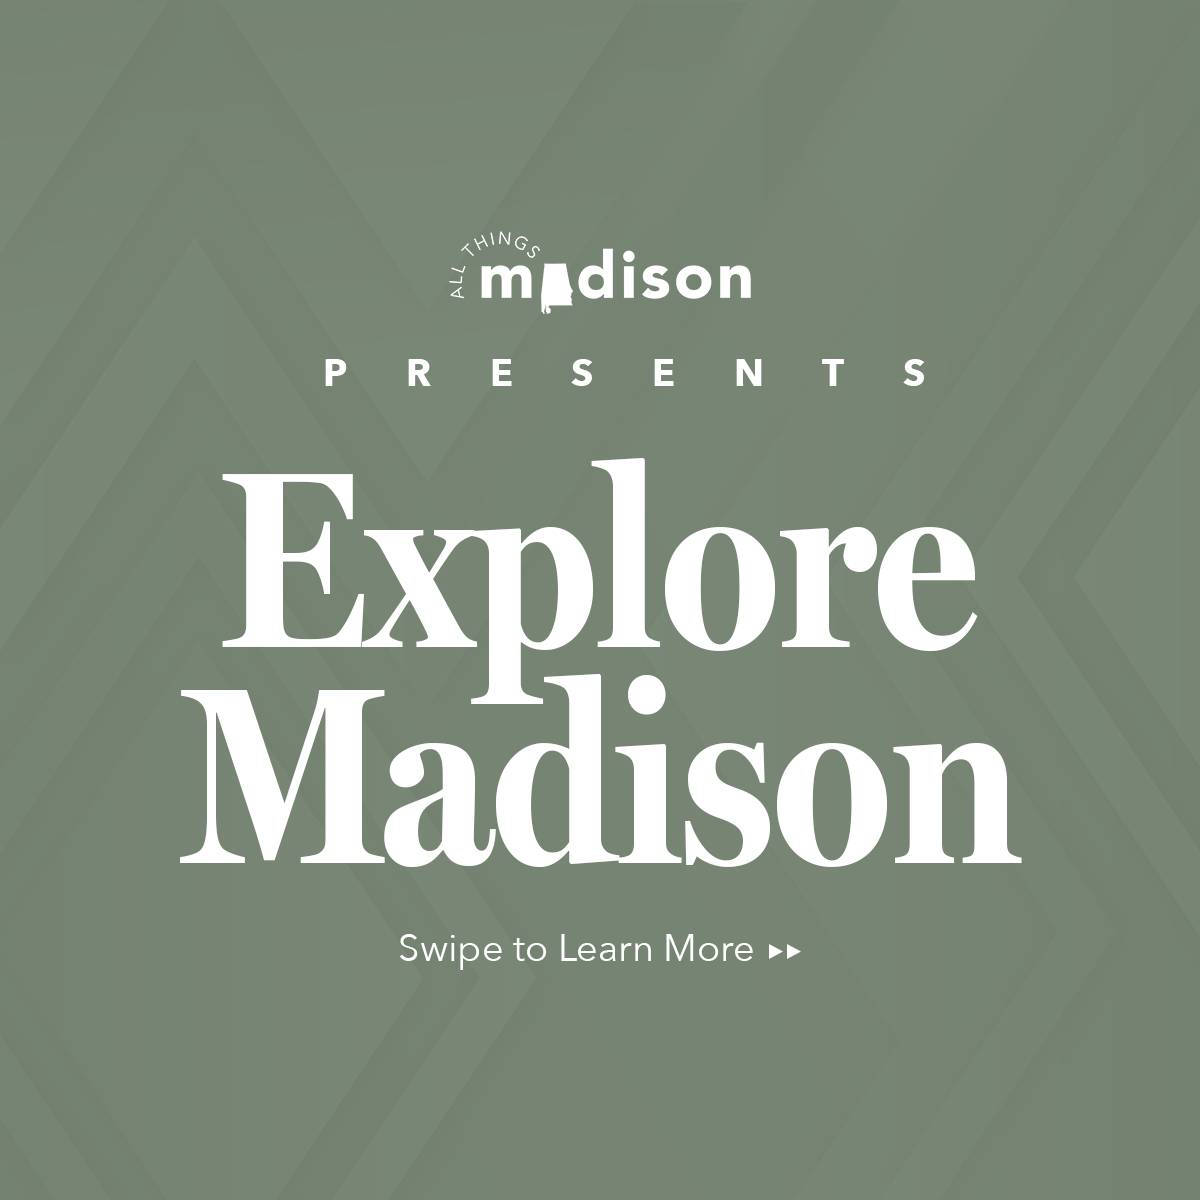 All Things Madison | Explore Madison, Proudly Presented by All Things Madison!